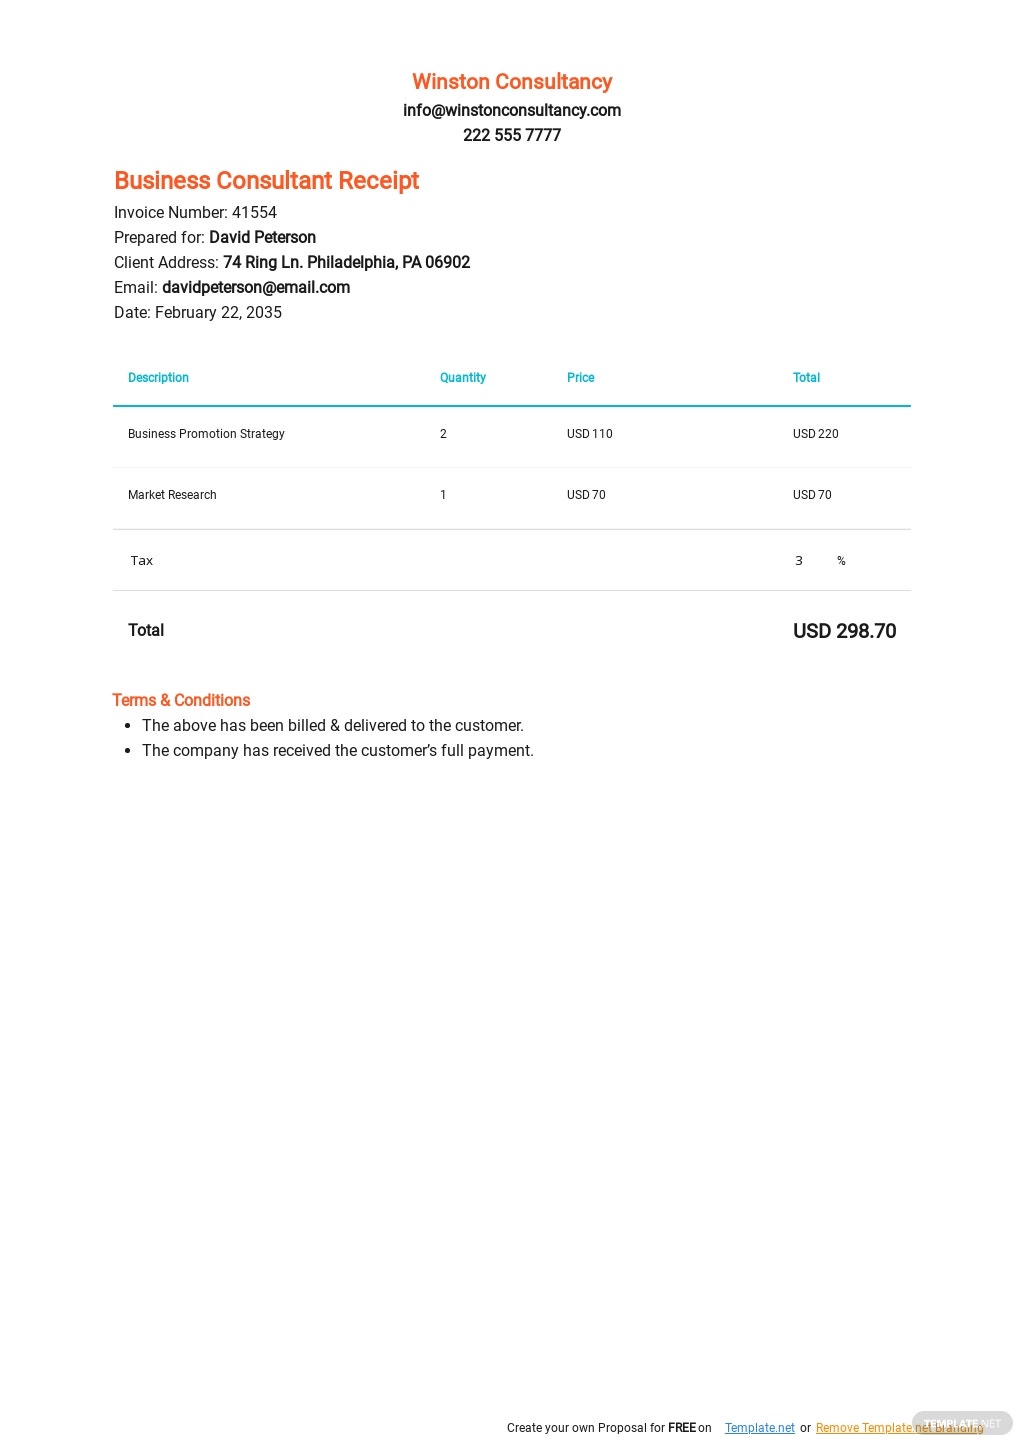 business-consultant-receipt-template